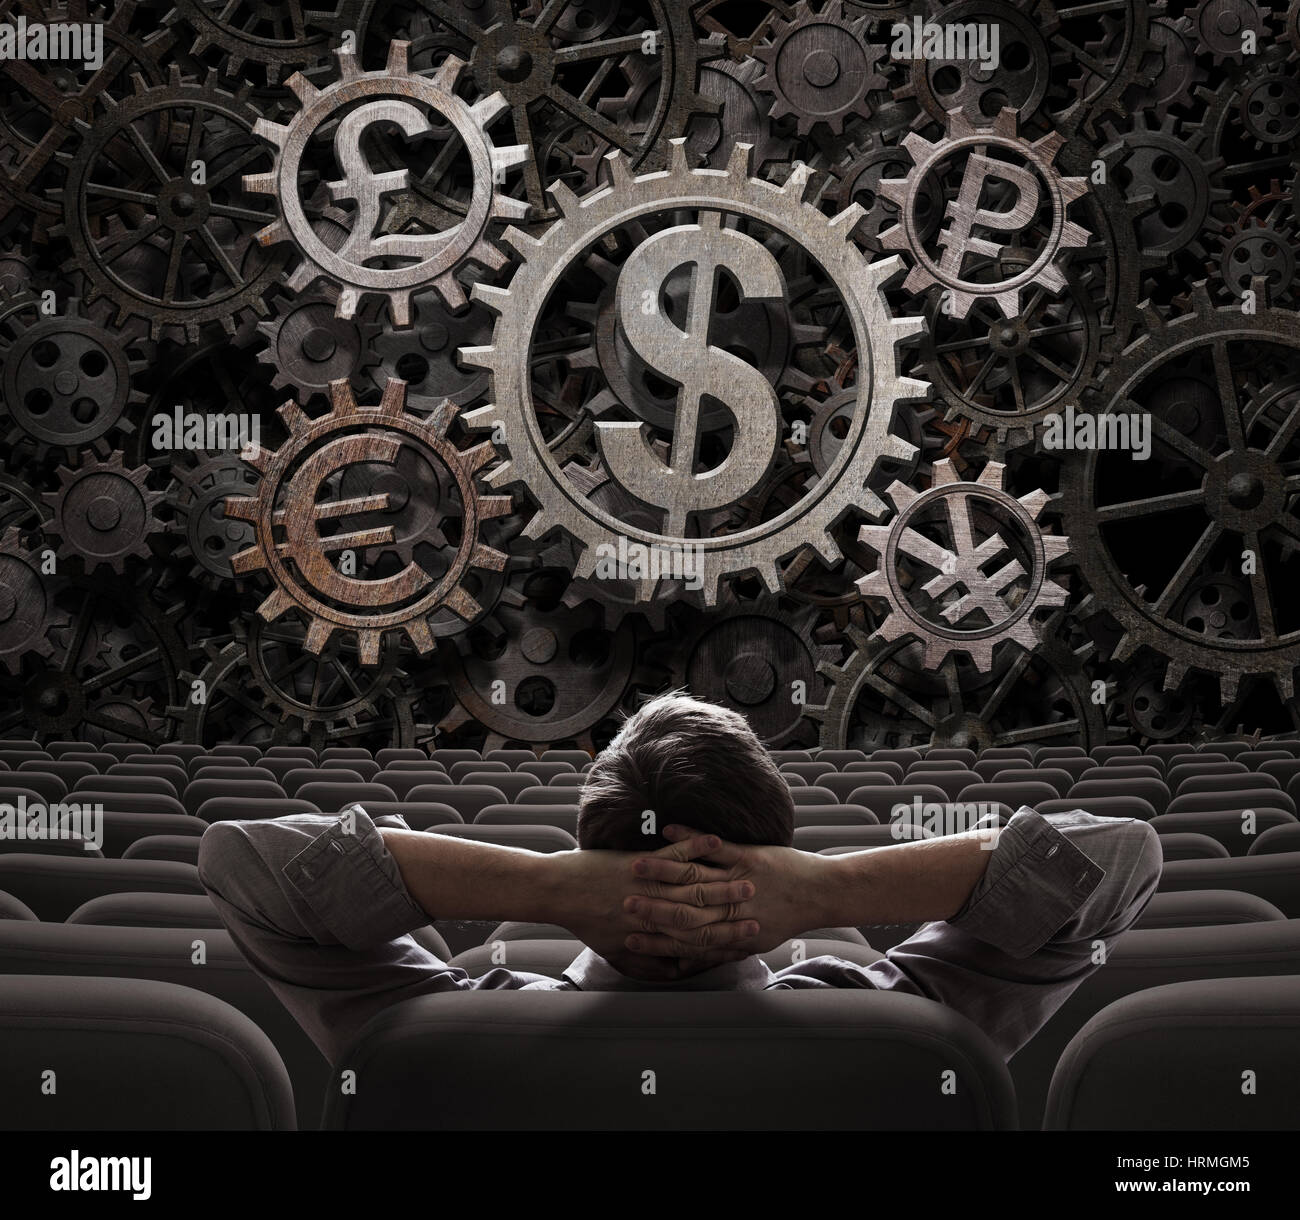 trader or broker looking on main currencies working gears 3d illustration Stock Photo